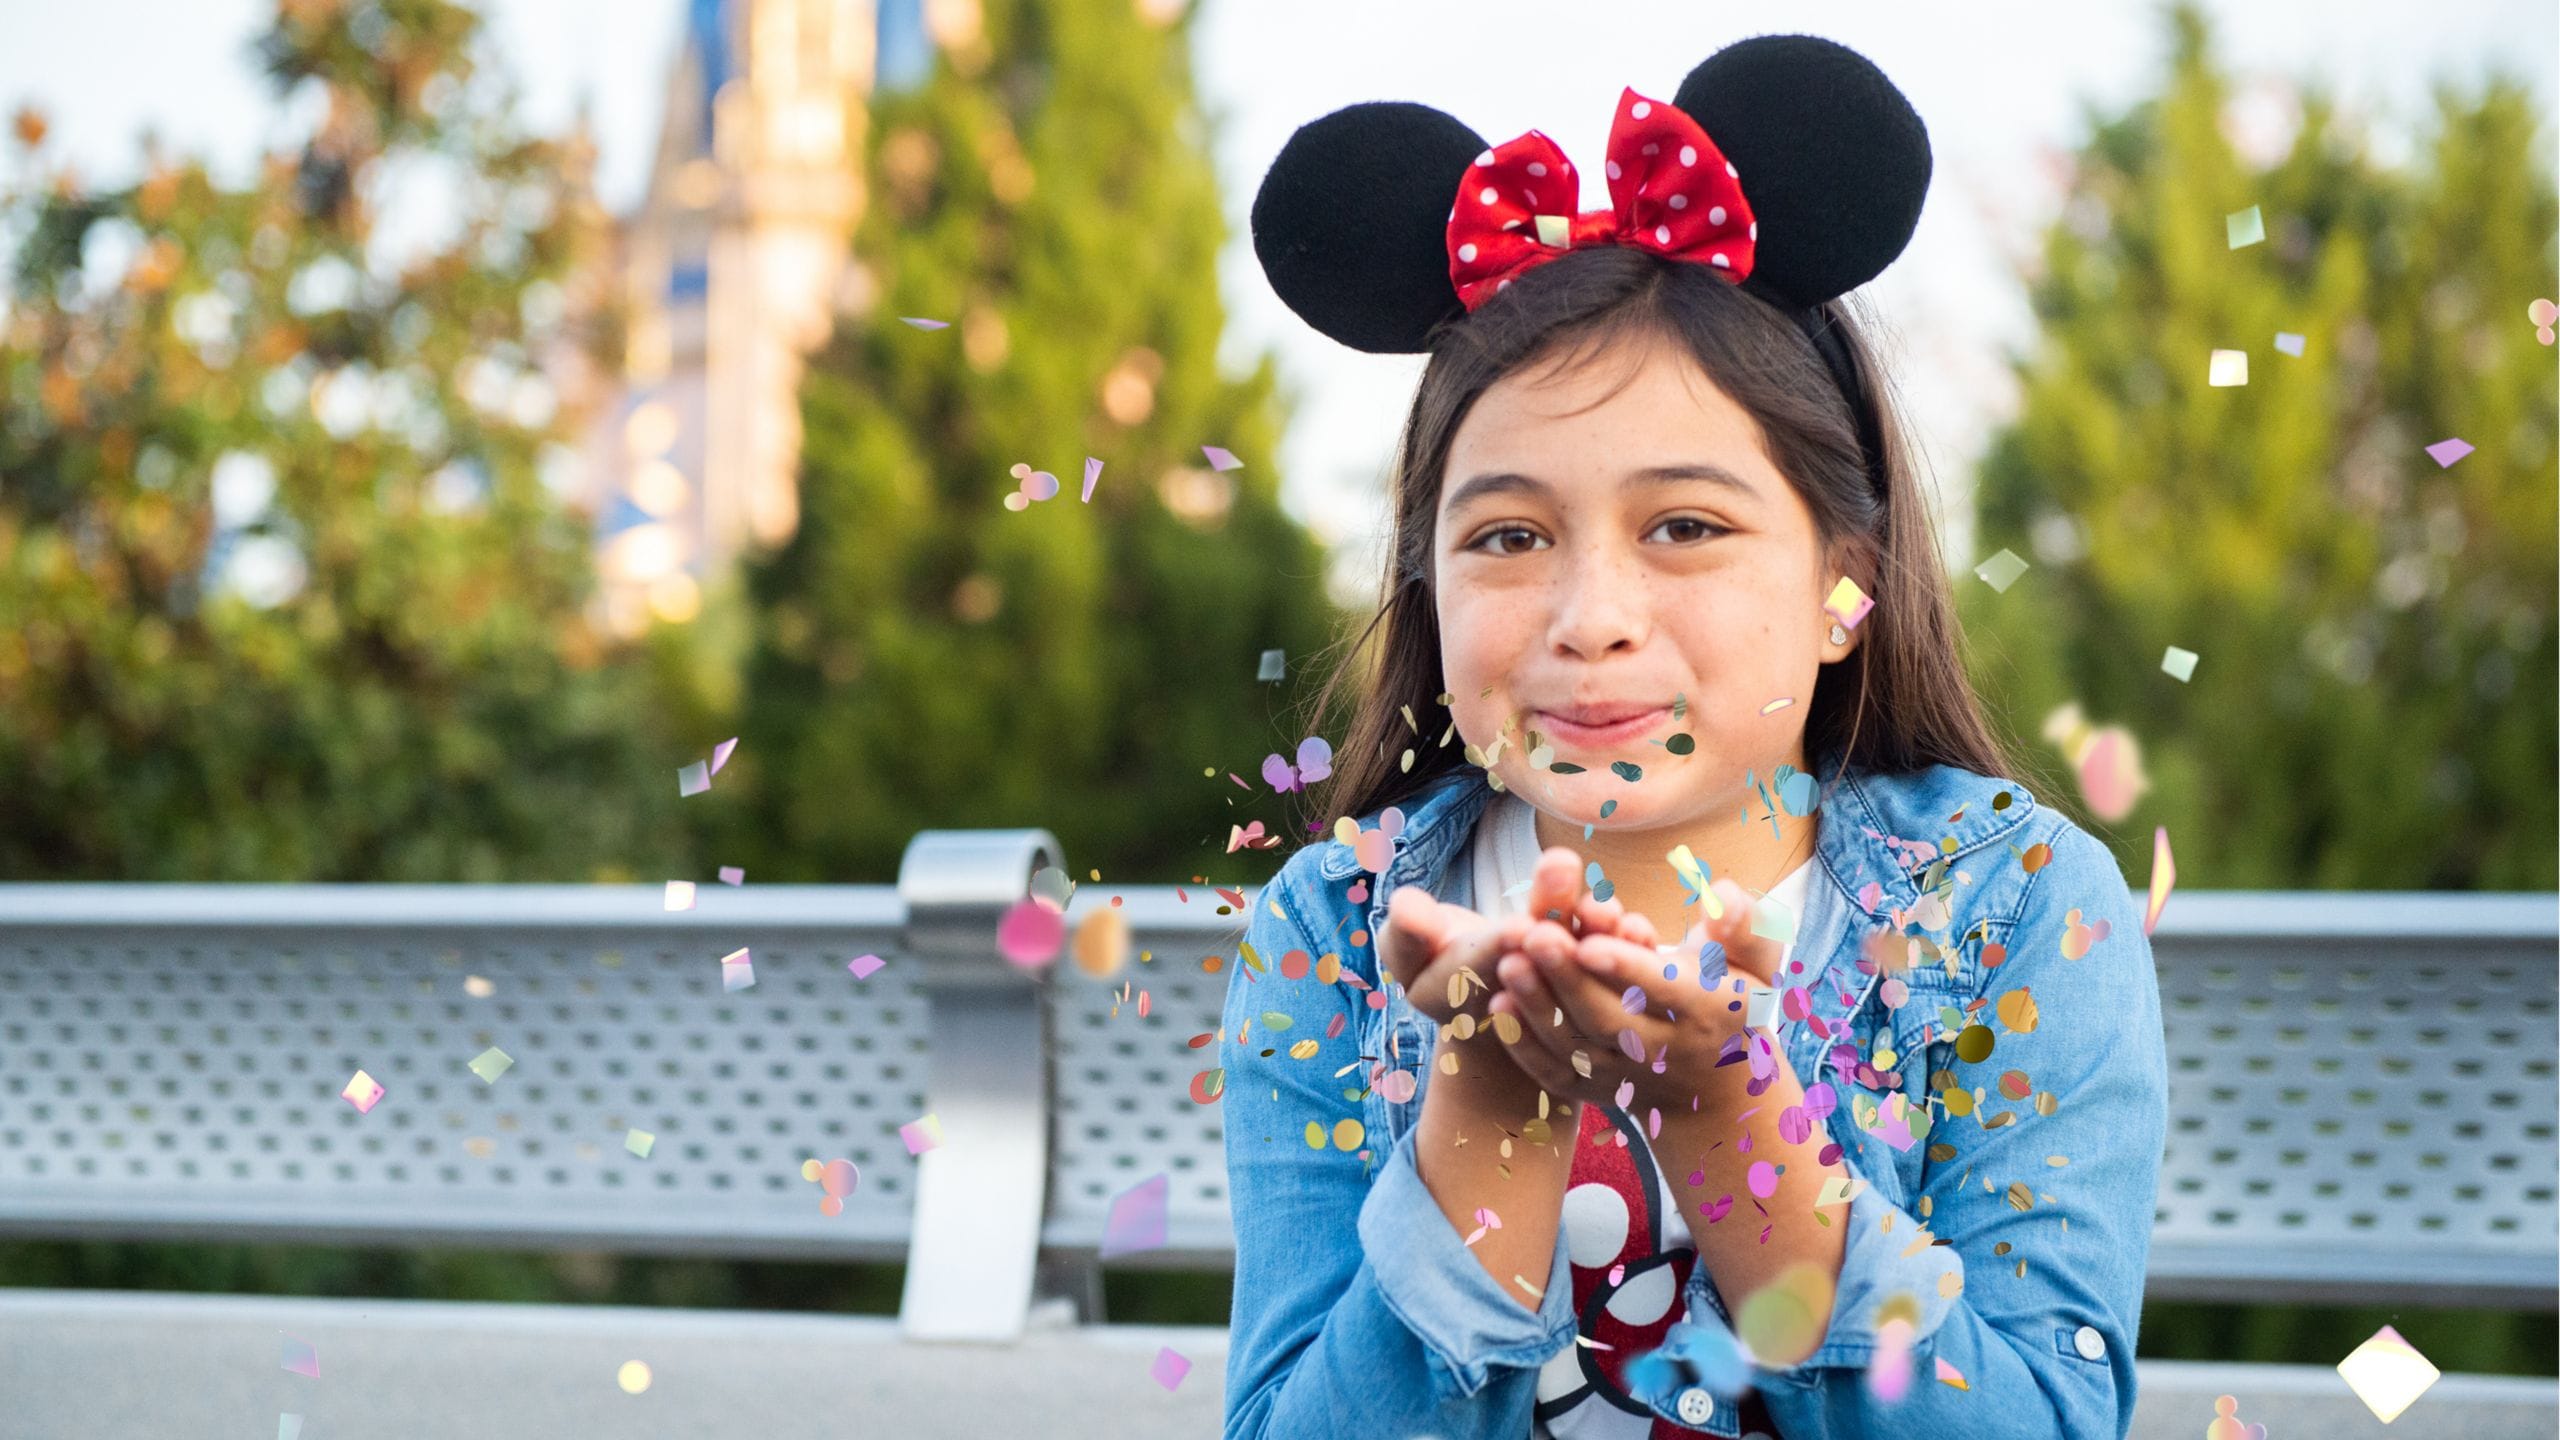 Disney Parks Uses Snapchat to Boost Experiences